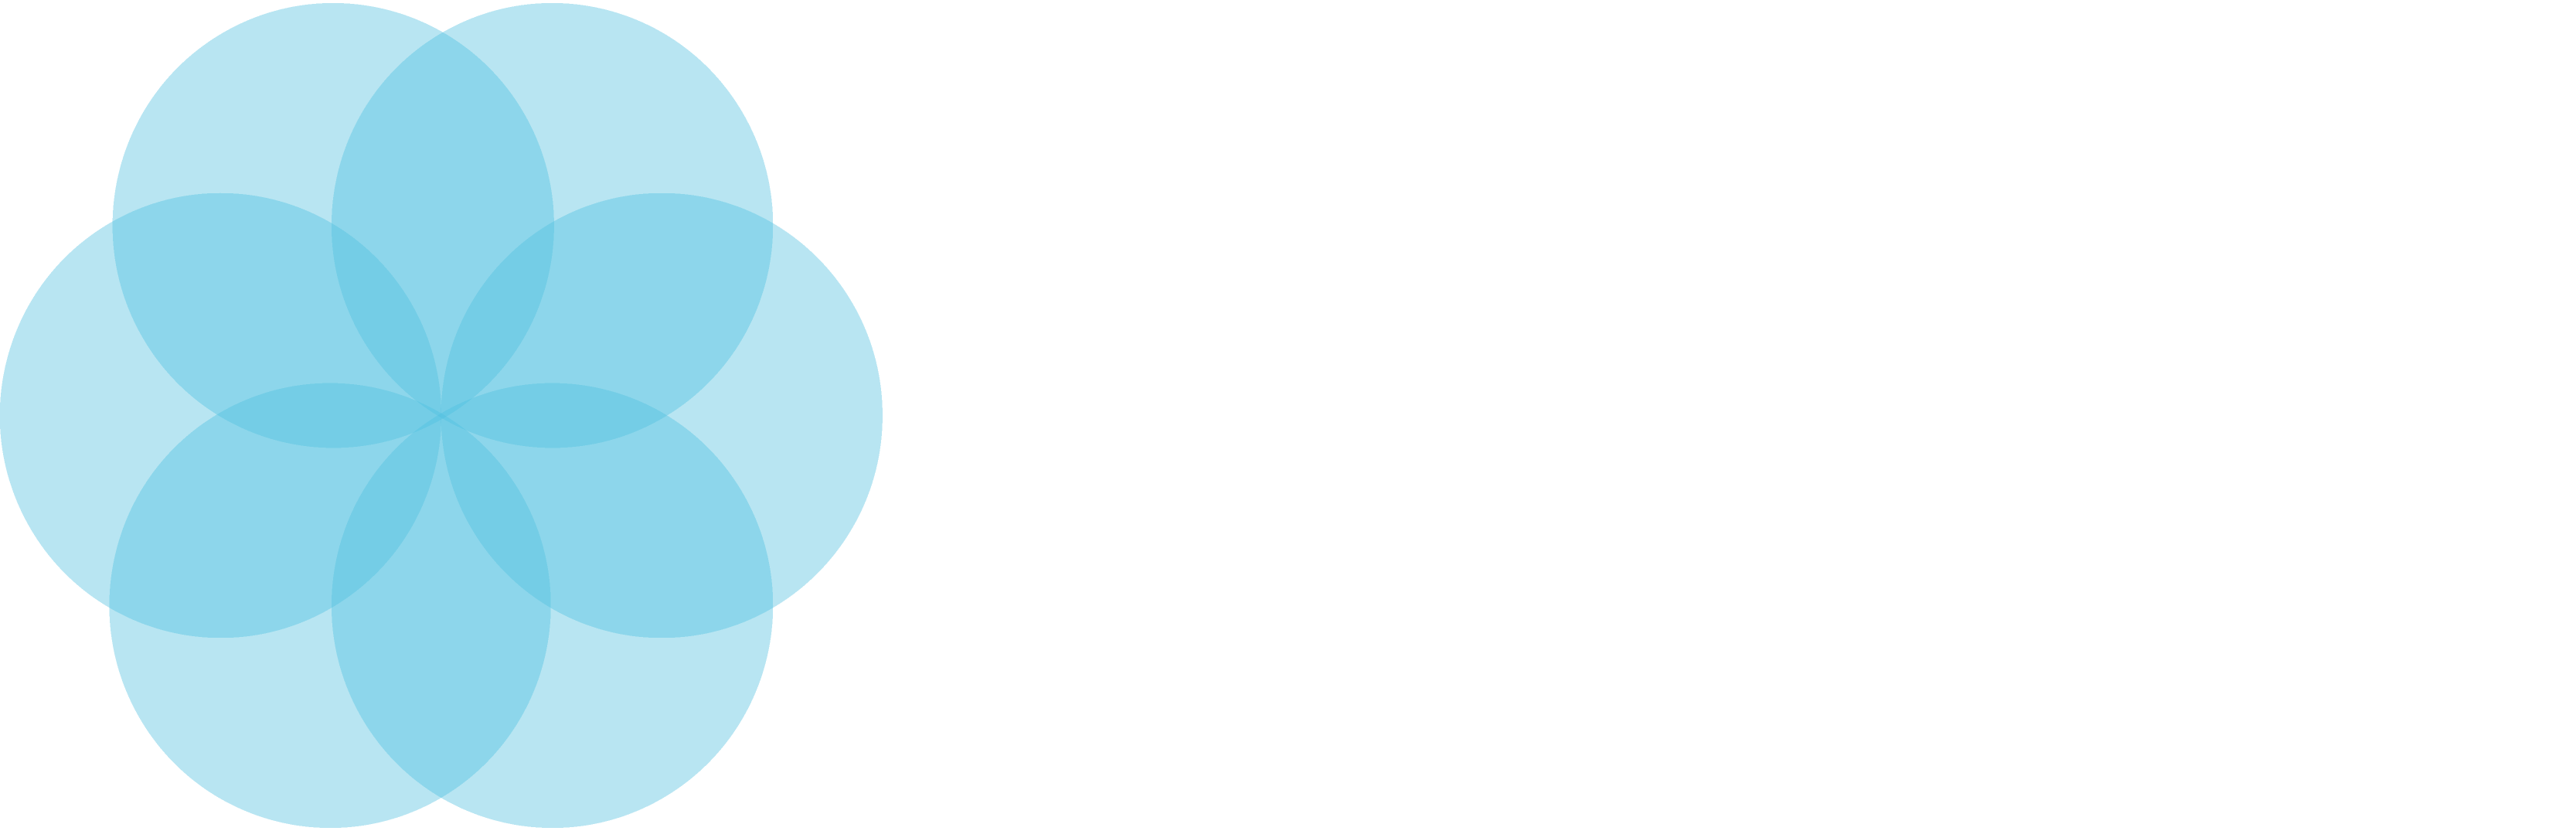 Salsify Logo - Salsify Product Content Management Day Free Trial. Salsify